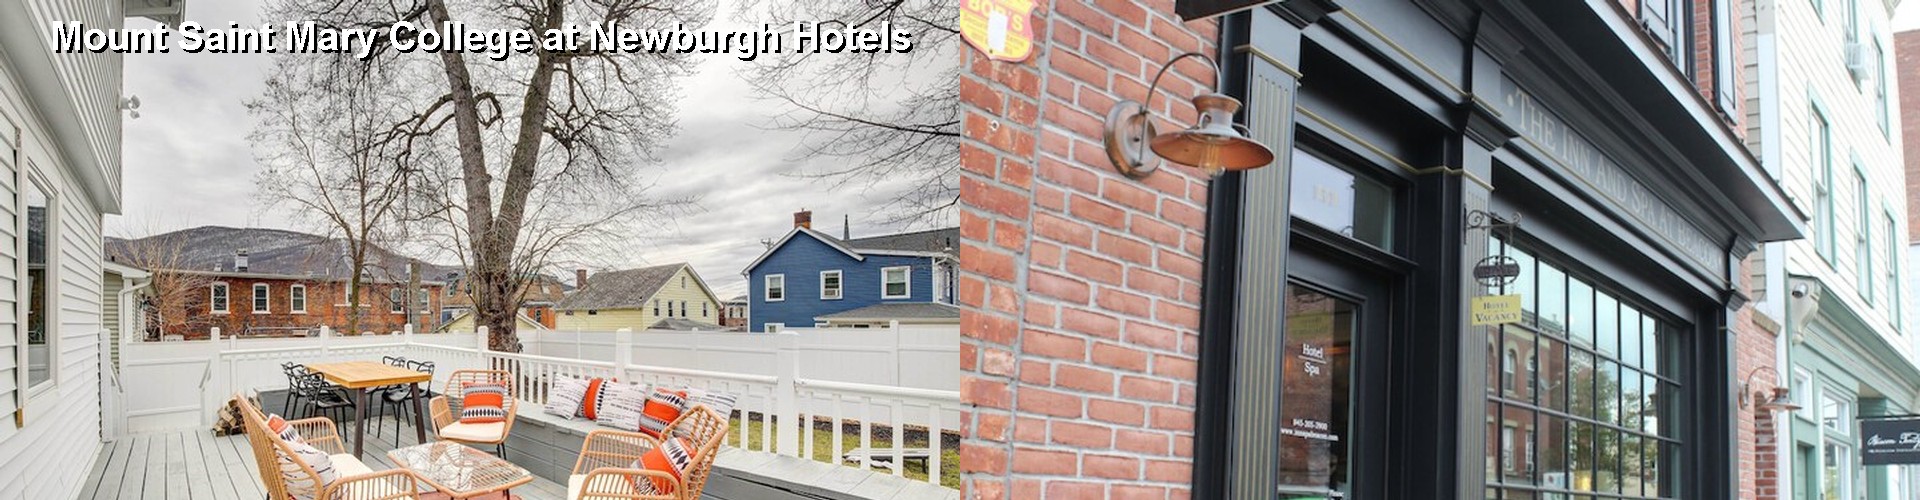 3 Best Hotels near Mount Saint Mary College at Newburgh